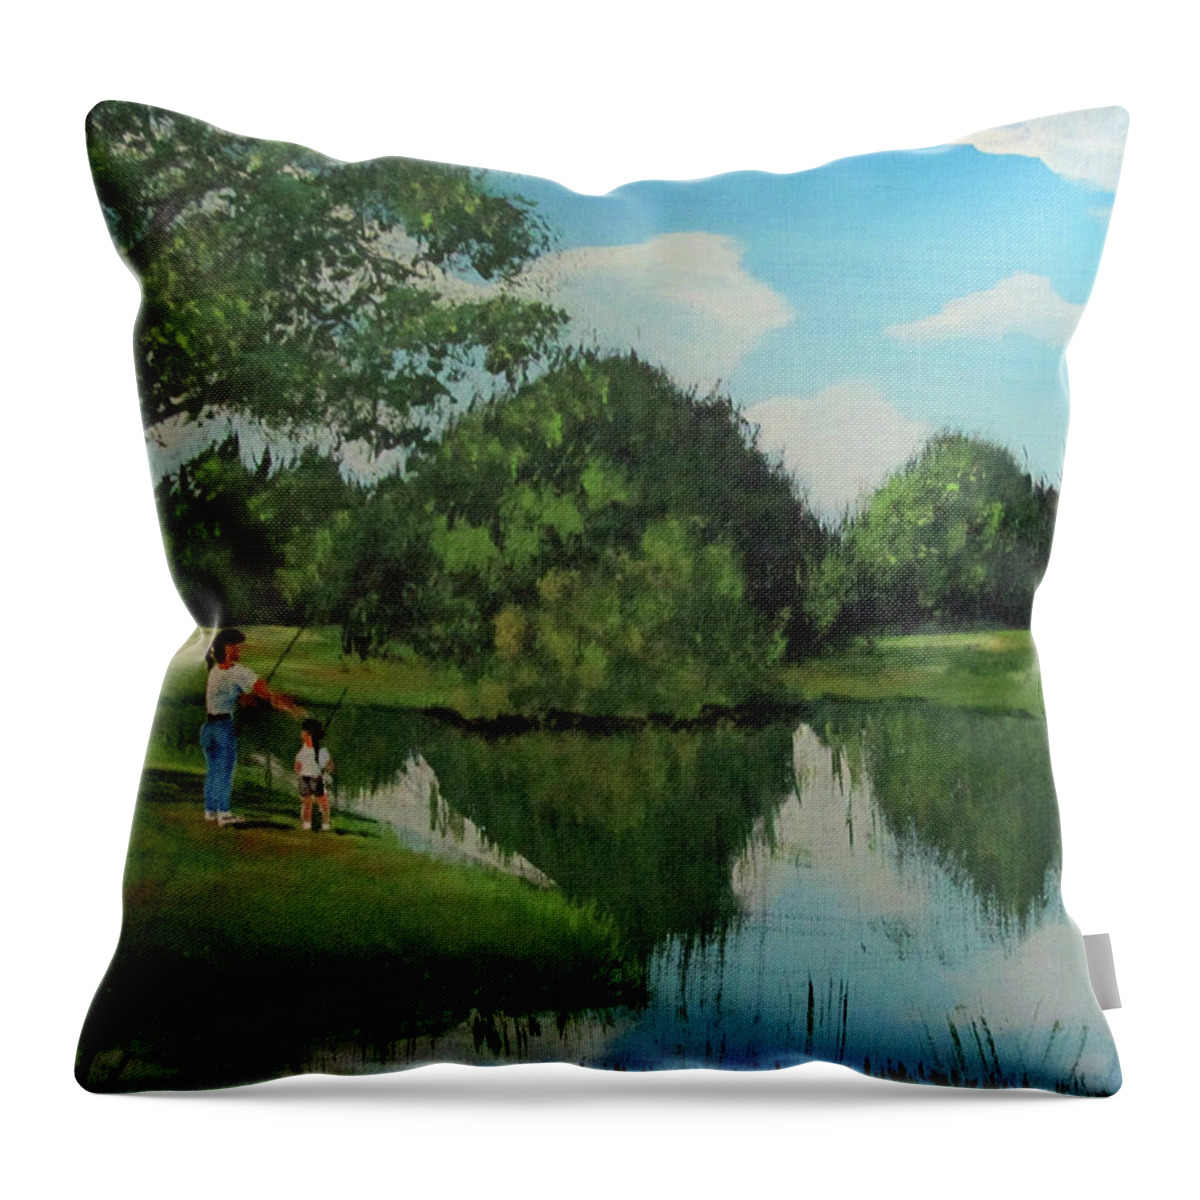 Fishing Throw Pillow featuring the painting Fishing By The Creek by Luis F Rodriguez